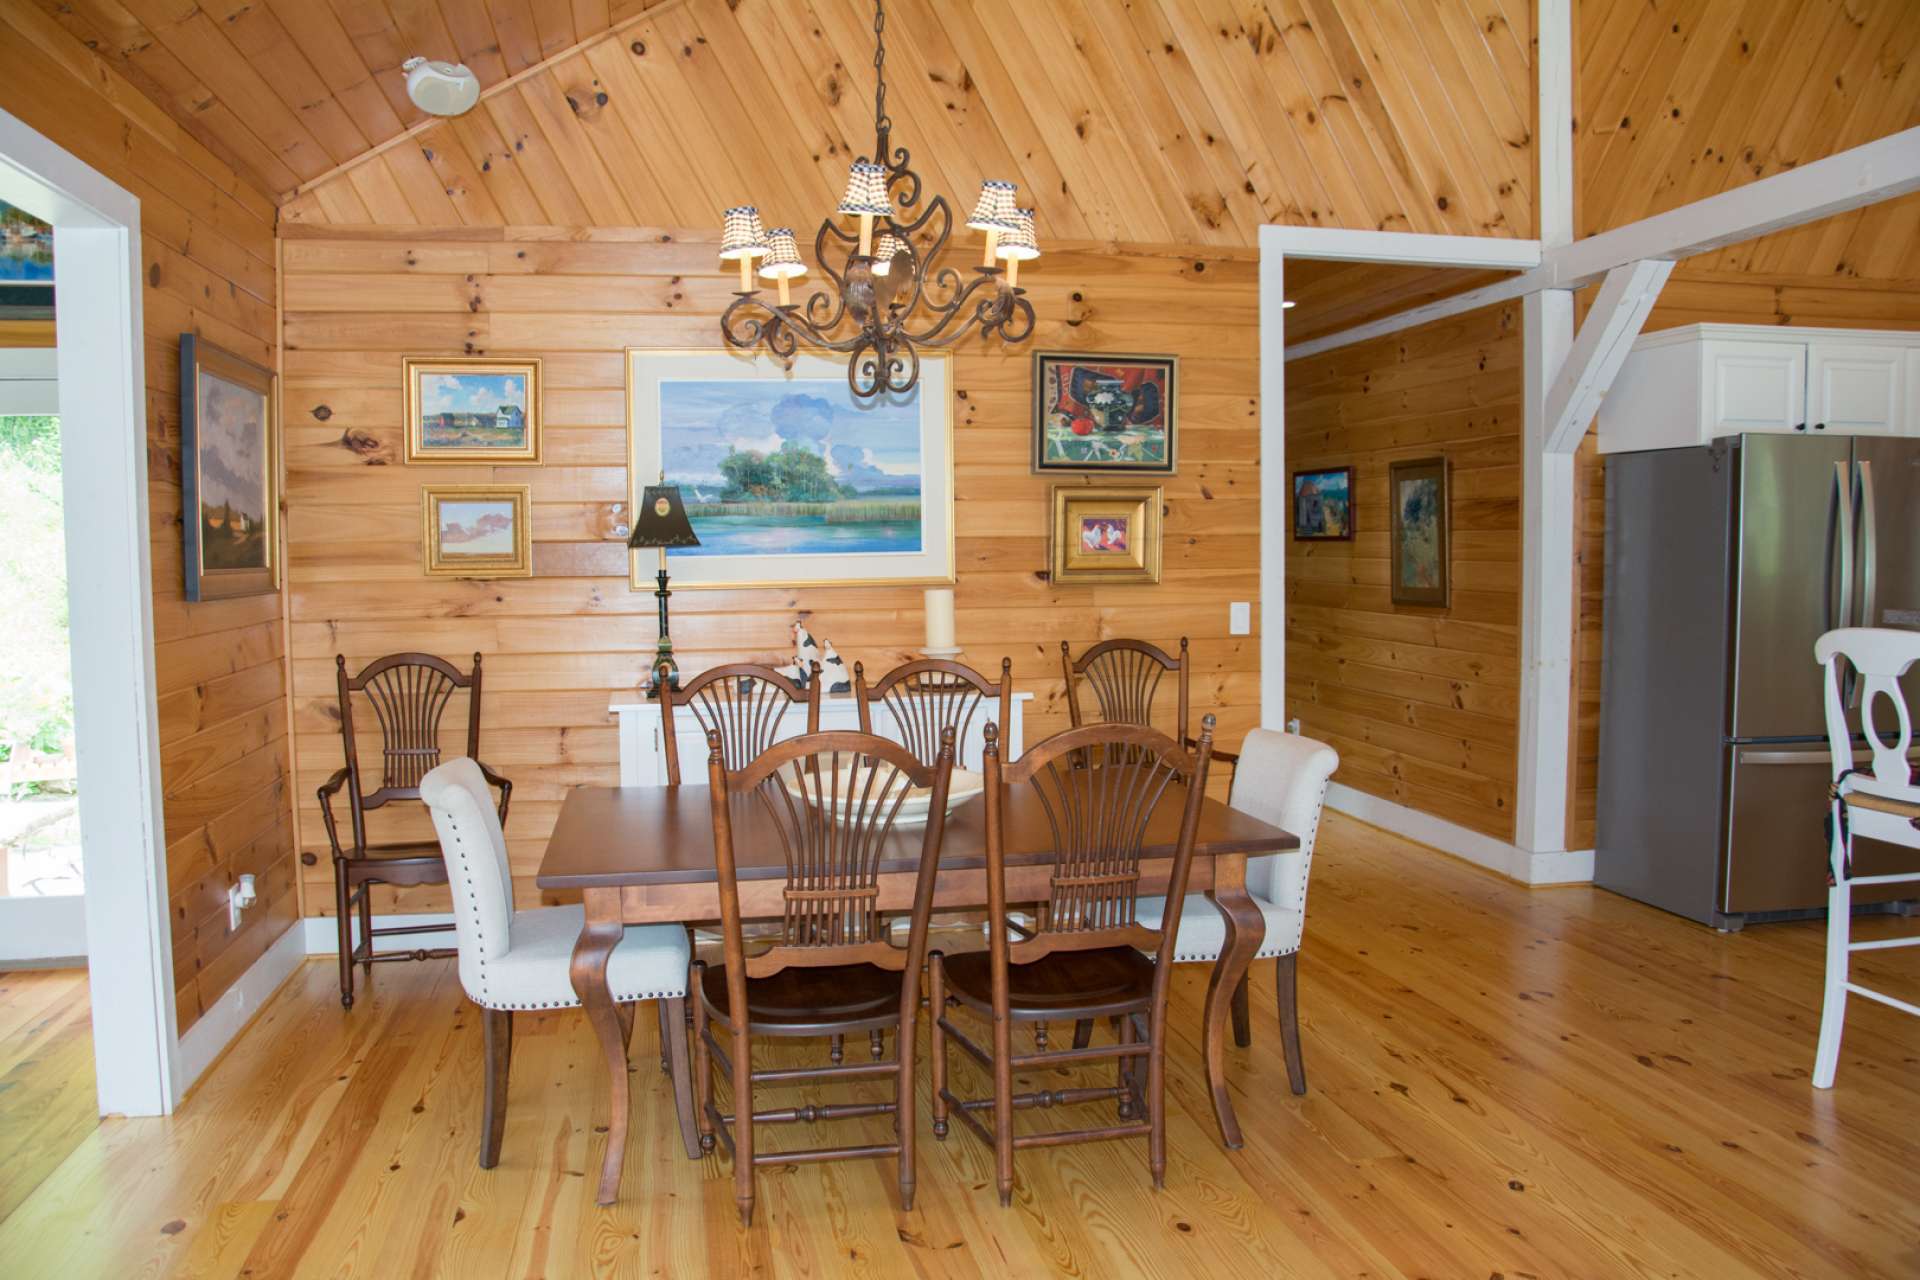 The formal dining area offers a nice area that is large enough for entertaining and special occasions while still cozy for a candlelight dinner for two.